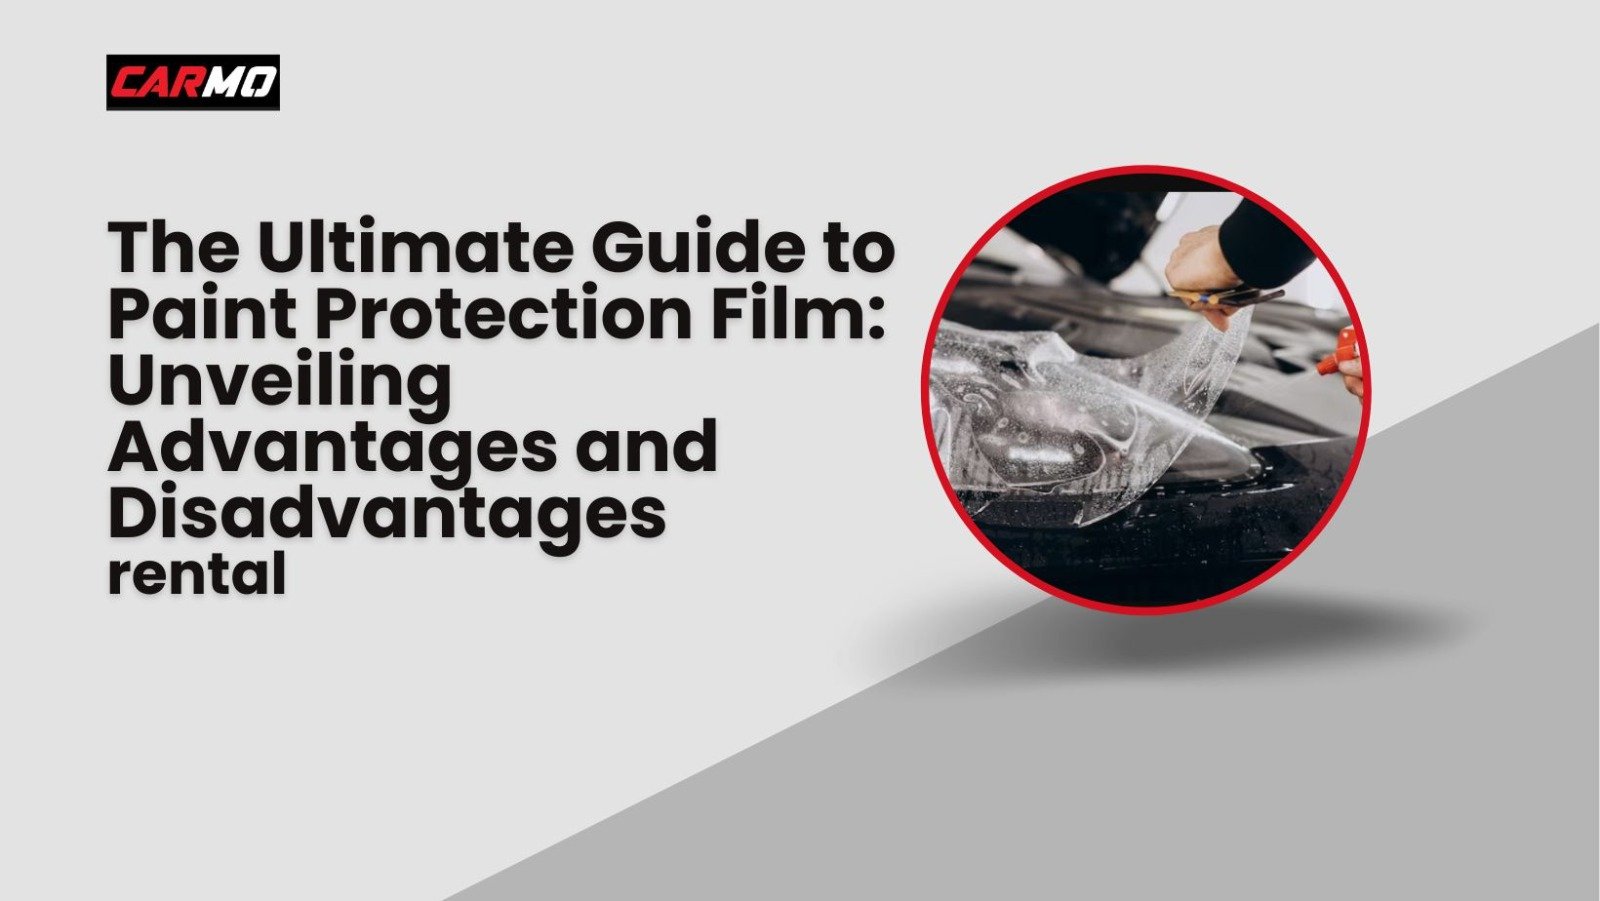 The Ultimate Guide to Paint Protection Film: Unveiling Advantages and Disadvantages